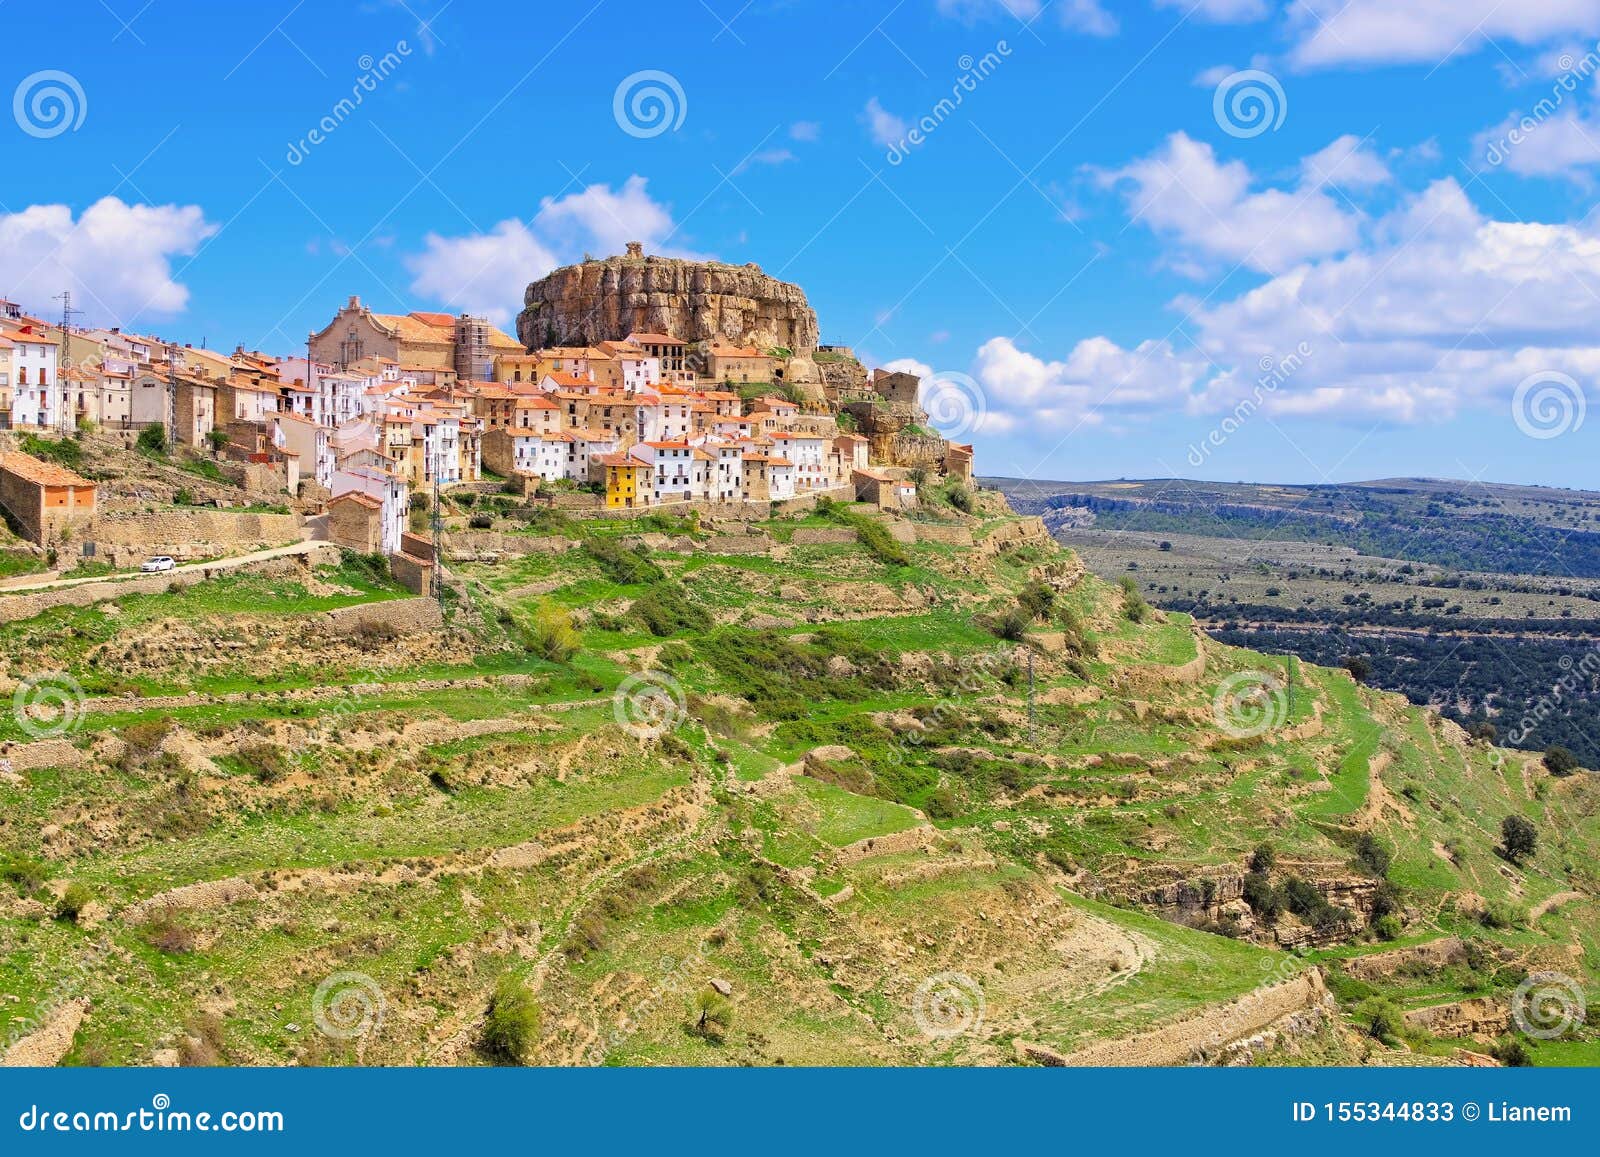 the old medieval town of ares del maestrat castellon